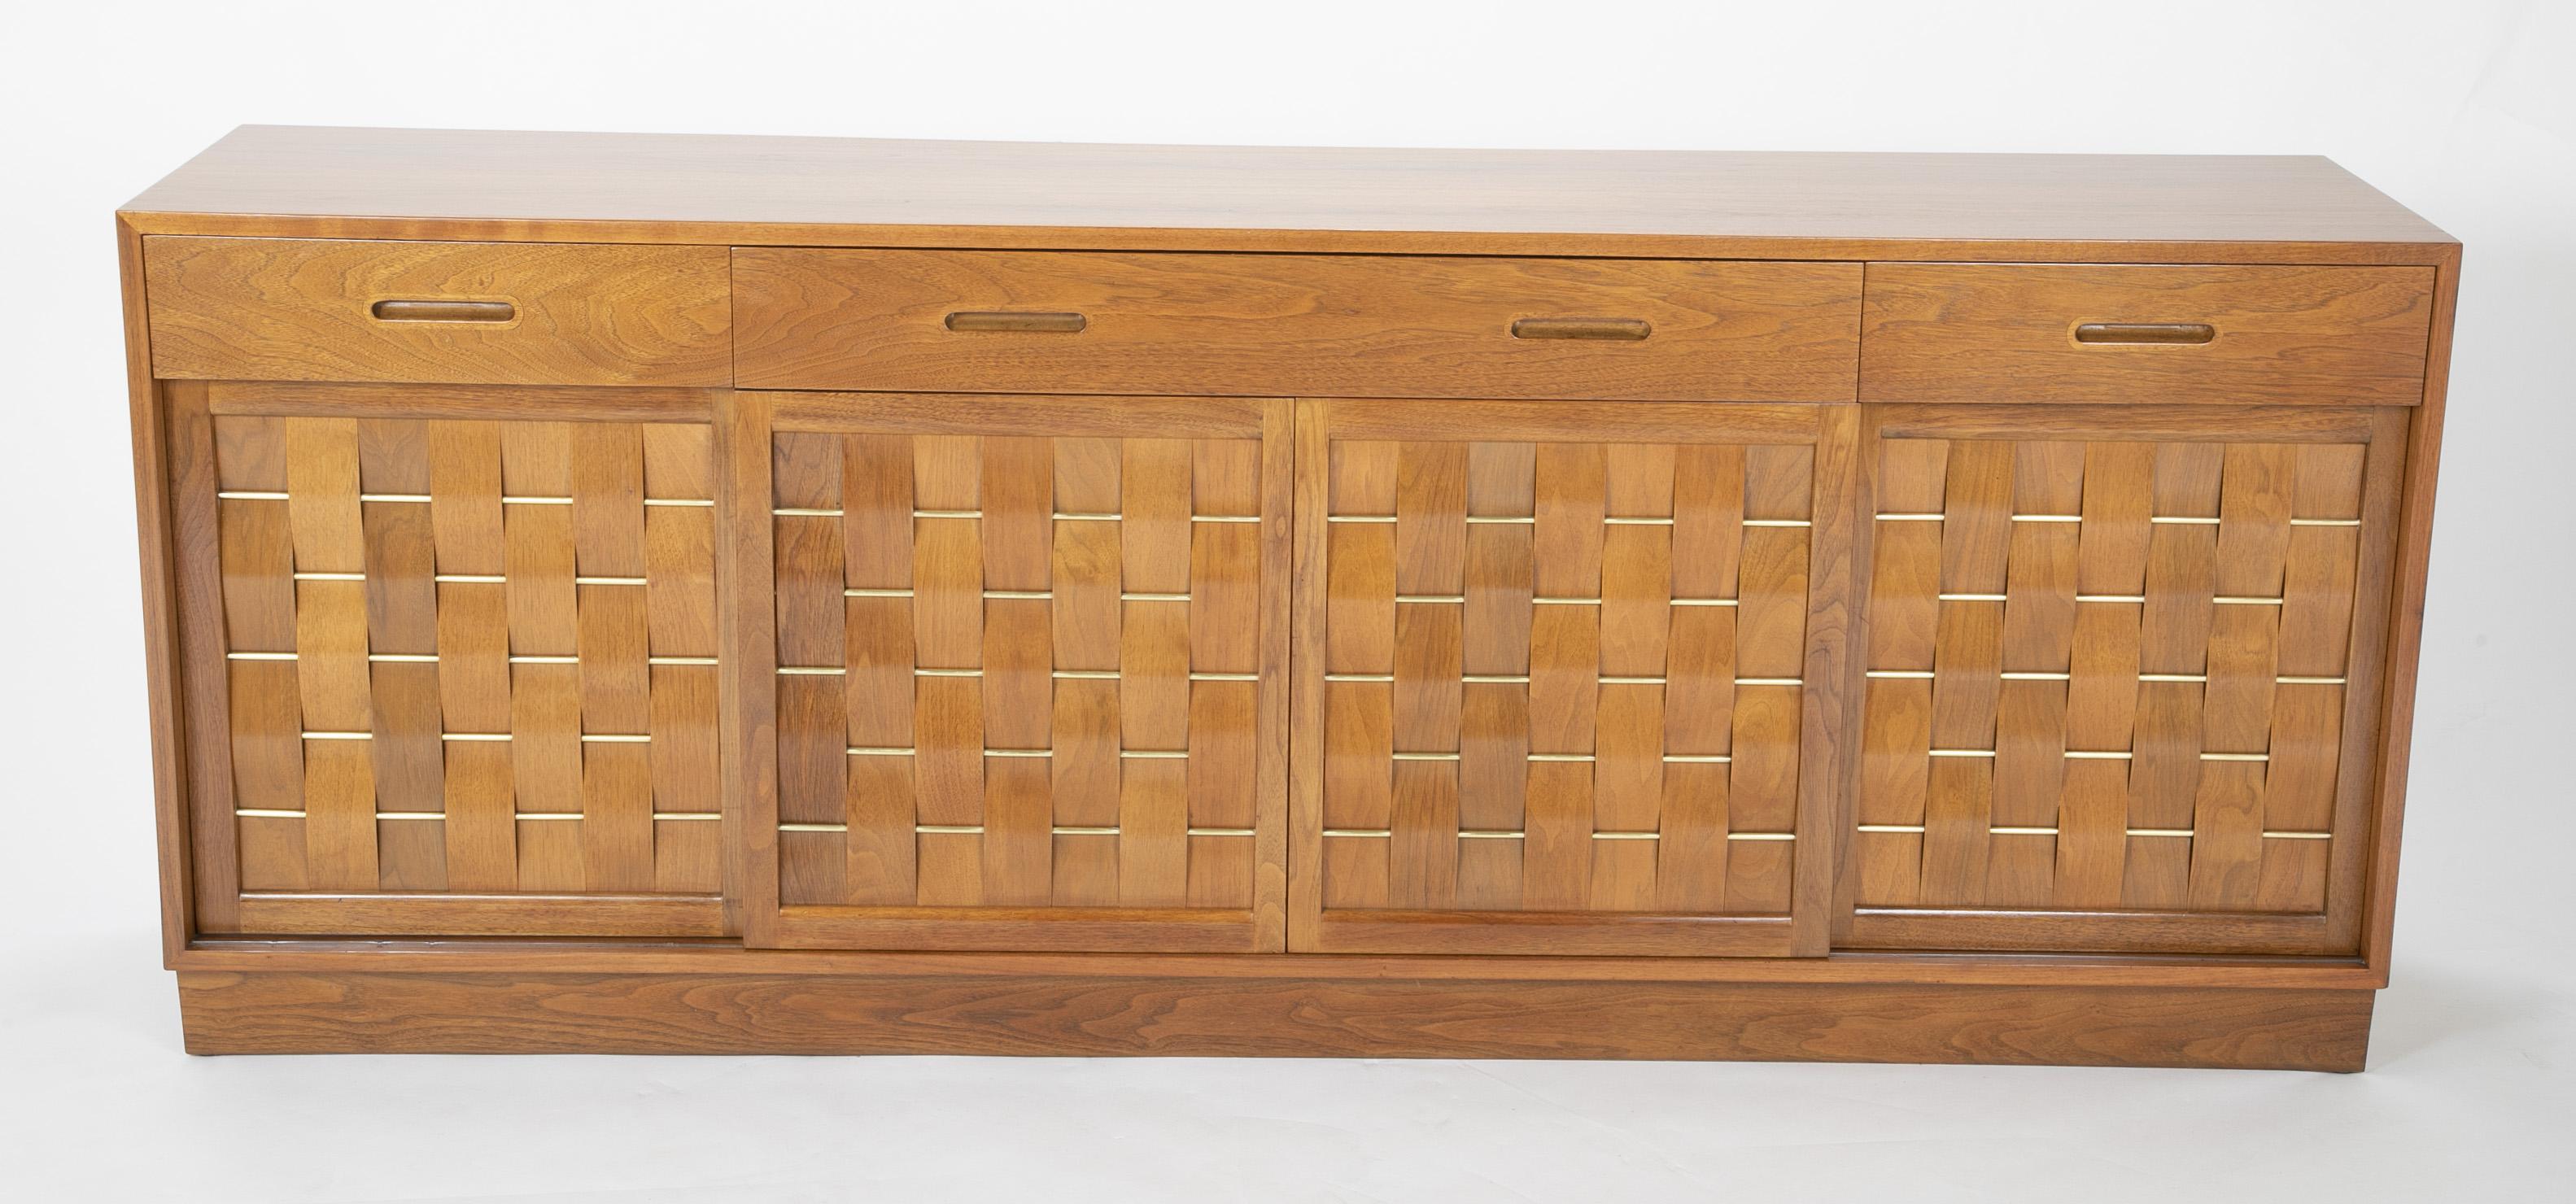 Mahogany sideboard with brass and woven mahogany doors designed by Edward Wormley for Dunbar.